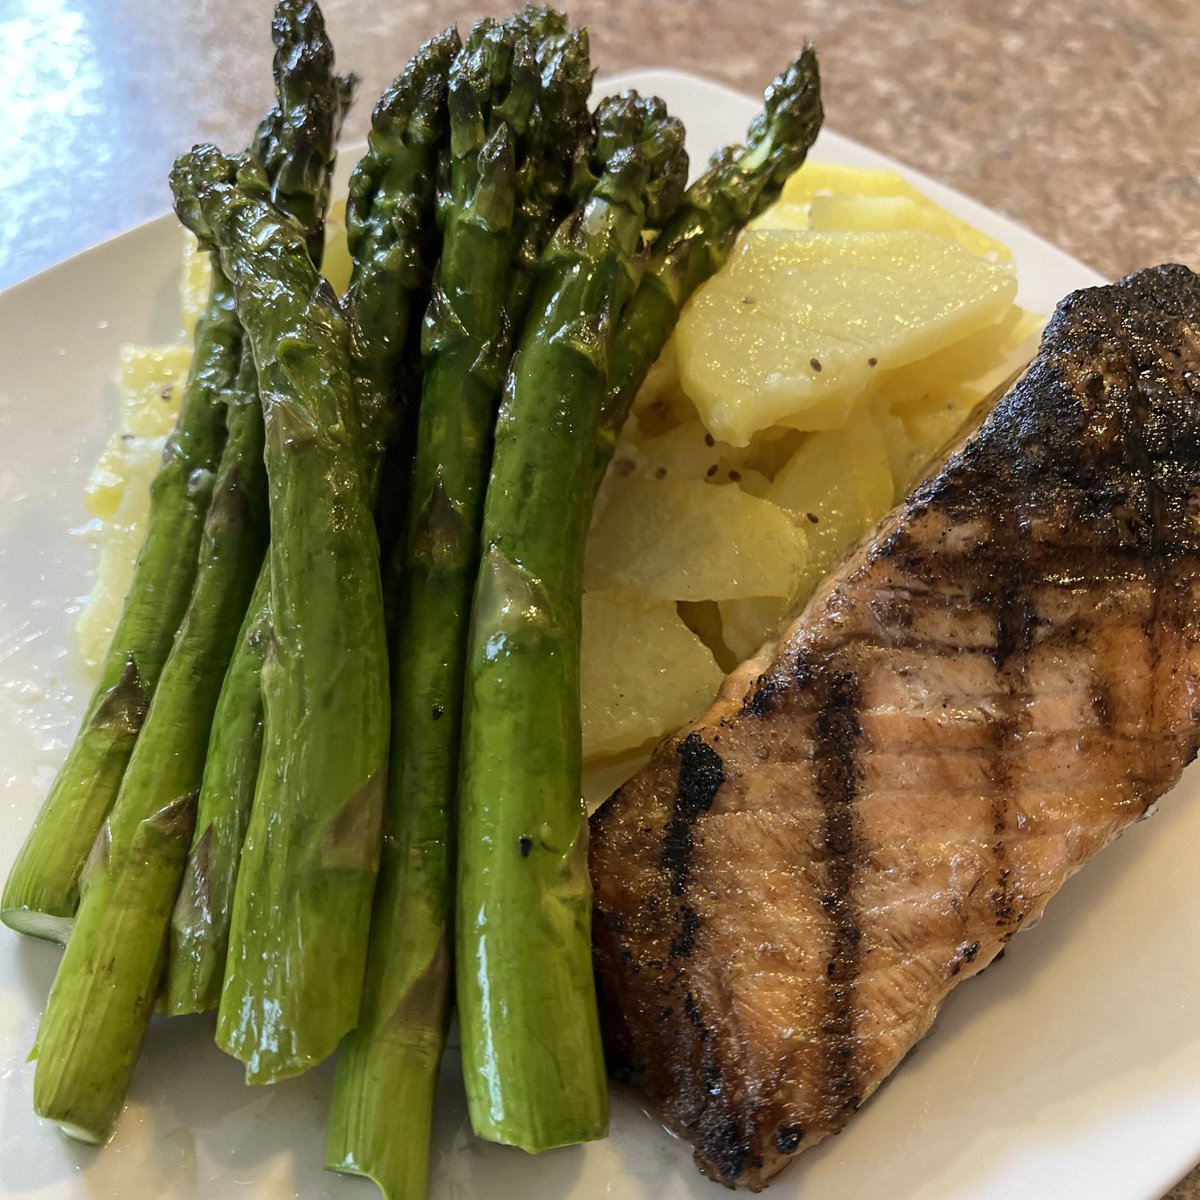 Grilled Salmon with Roasted Asparagus & Lemon Chia Butter Potatoes 🍽 #ChefAtHome #Cooking #HealthyEating